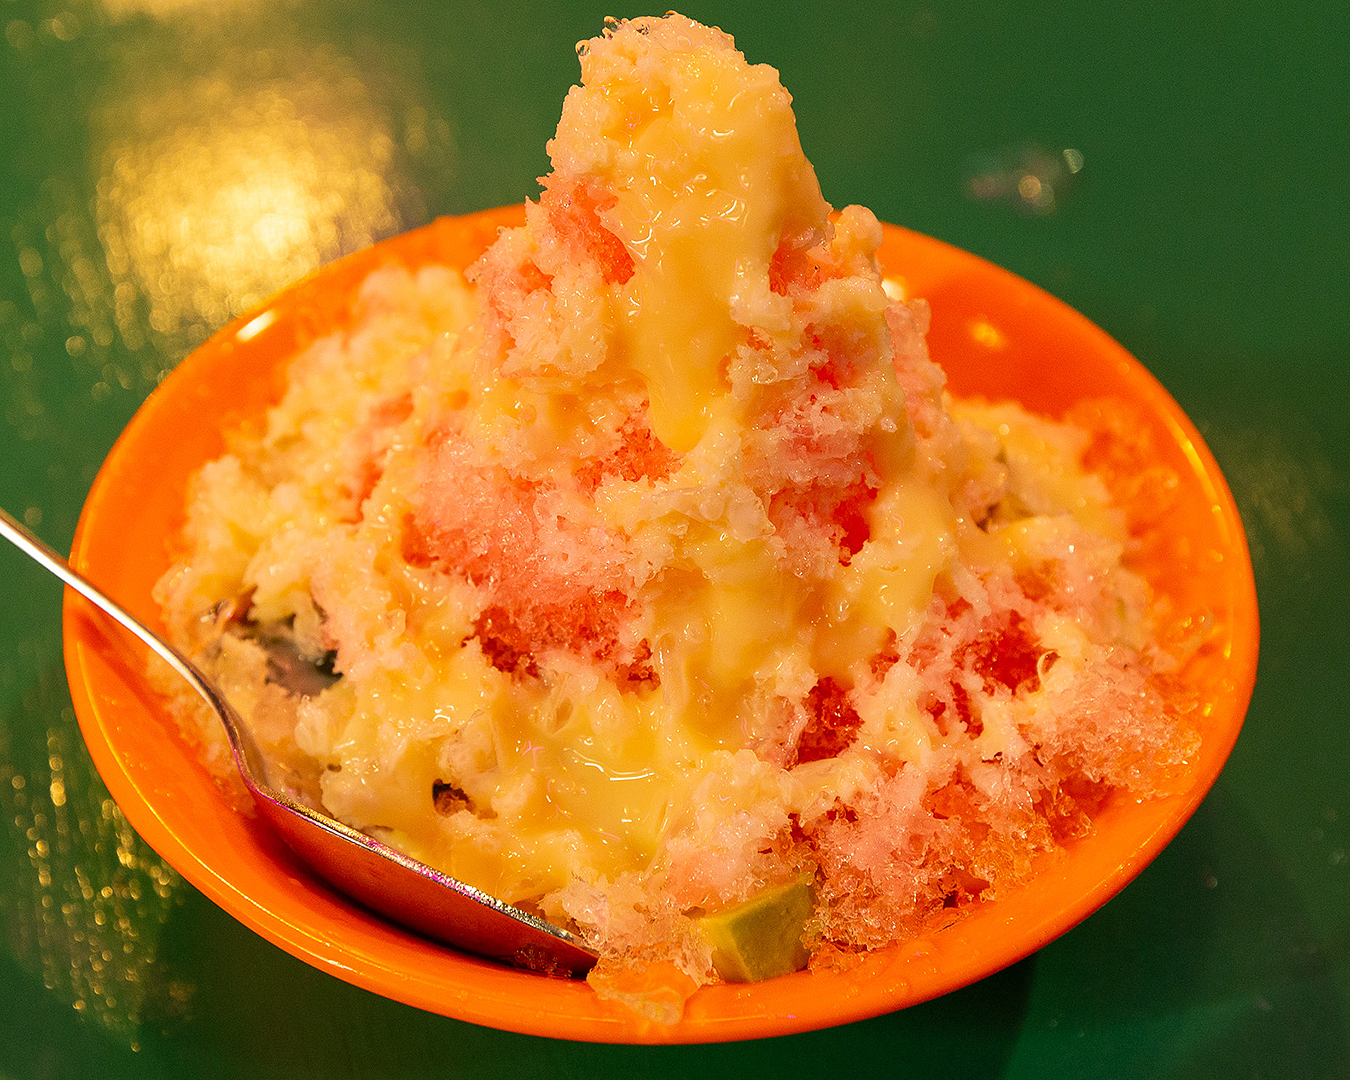 The Es Teler - shaved ice with condensed milk.